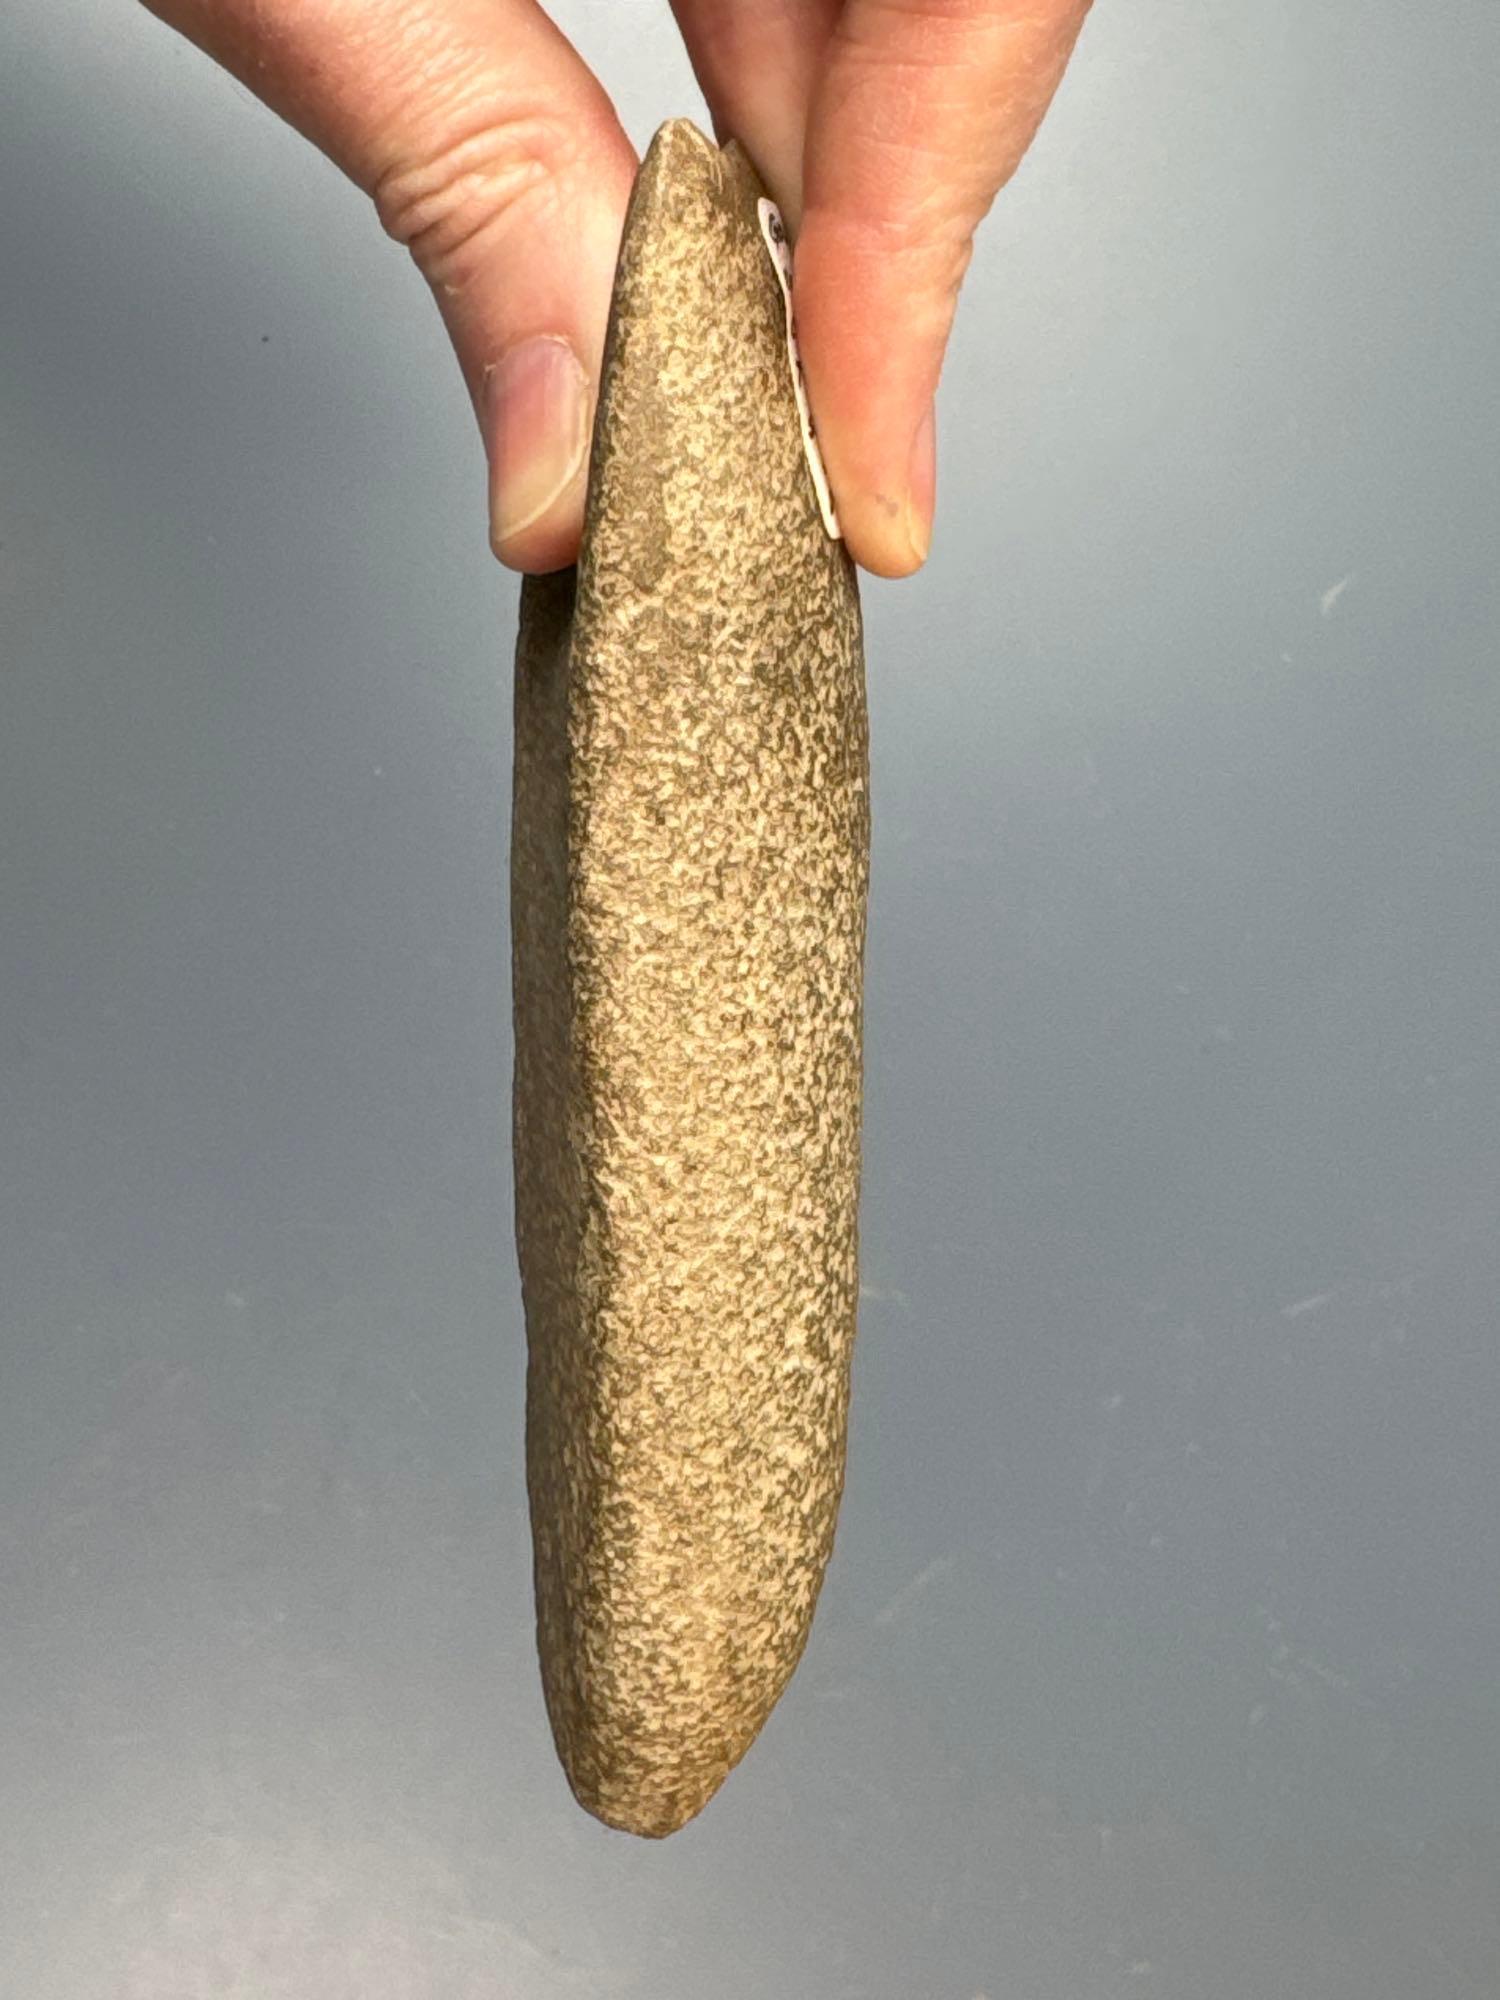 5" Stunning Humped Gouge, Found in Upper Delaware River Valley, From the Cutten Collection of Allent